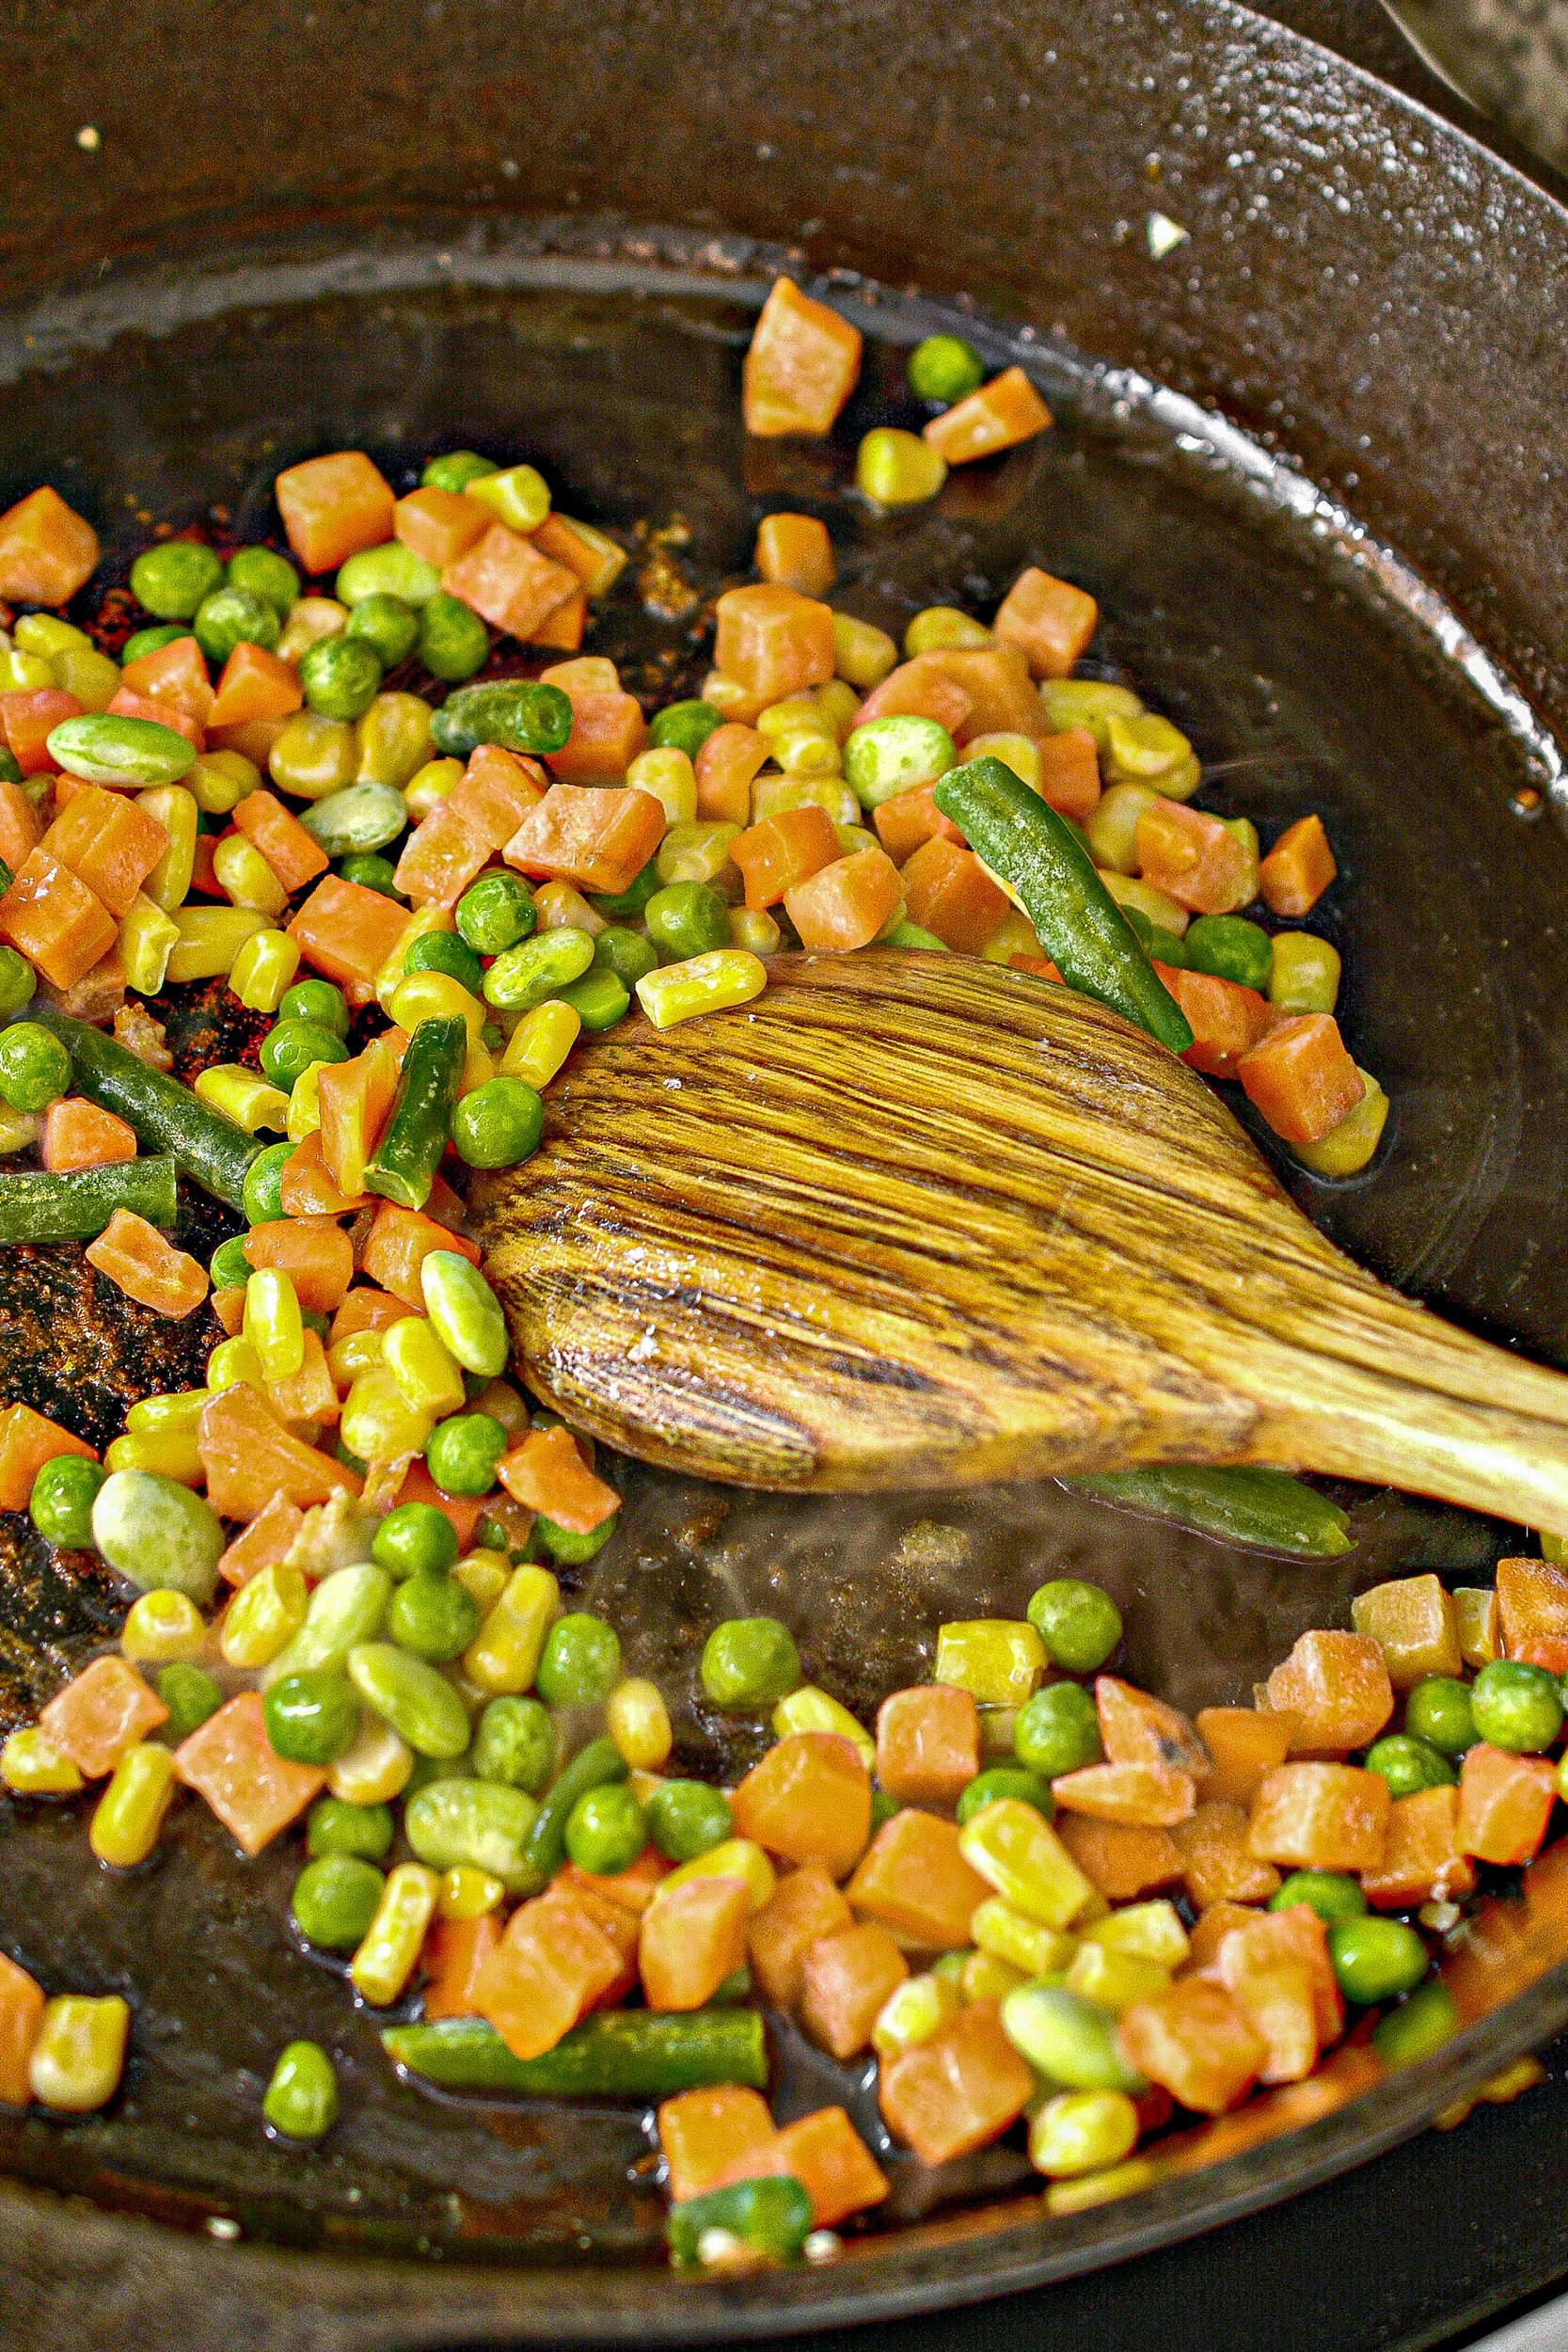 Add the veggies and garlic to the skillet and cook until the vegetables begin to soften.